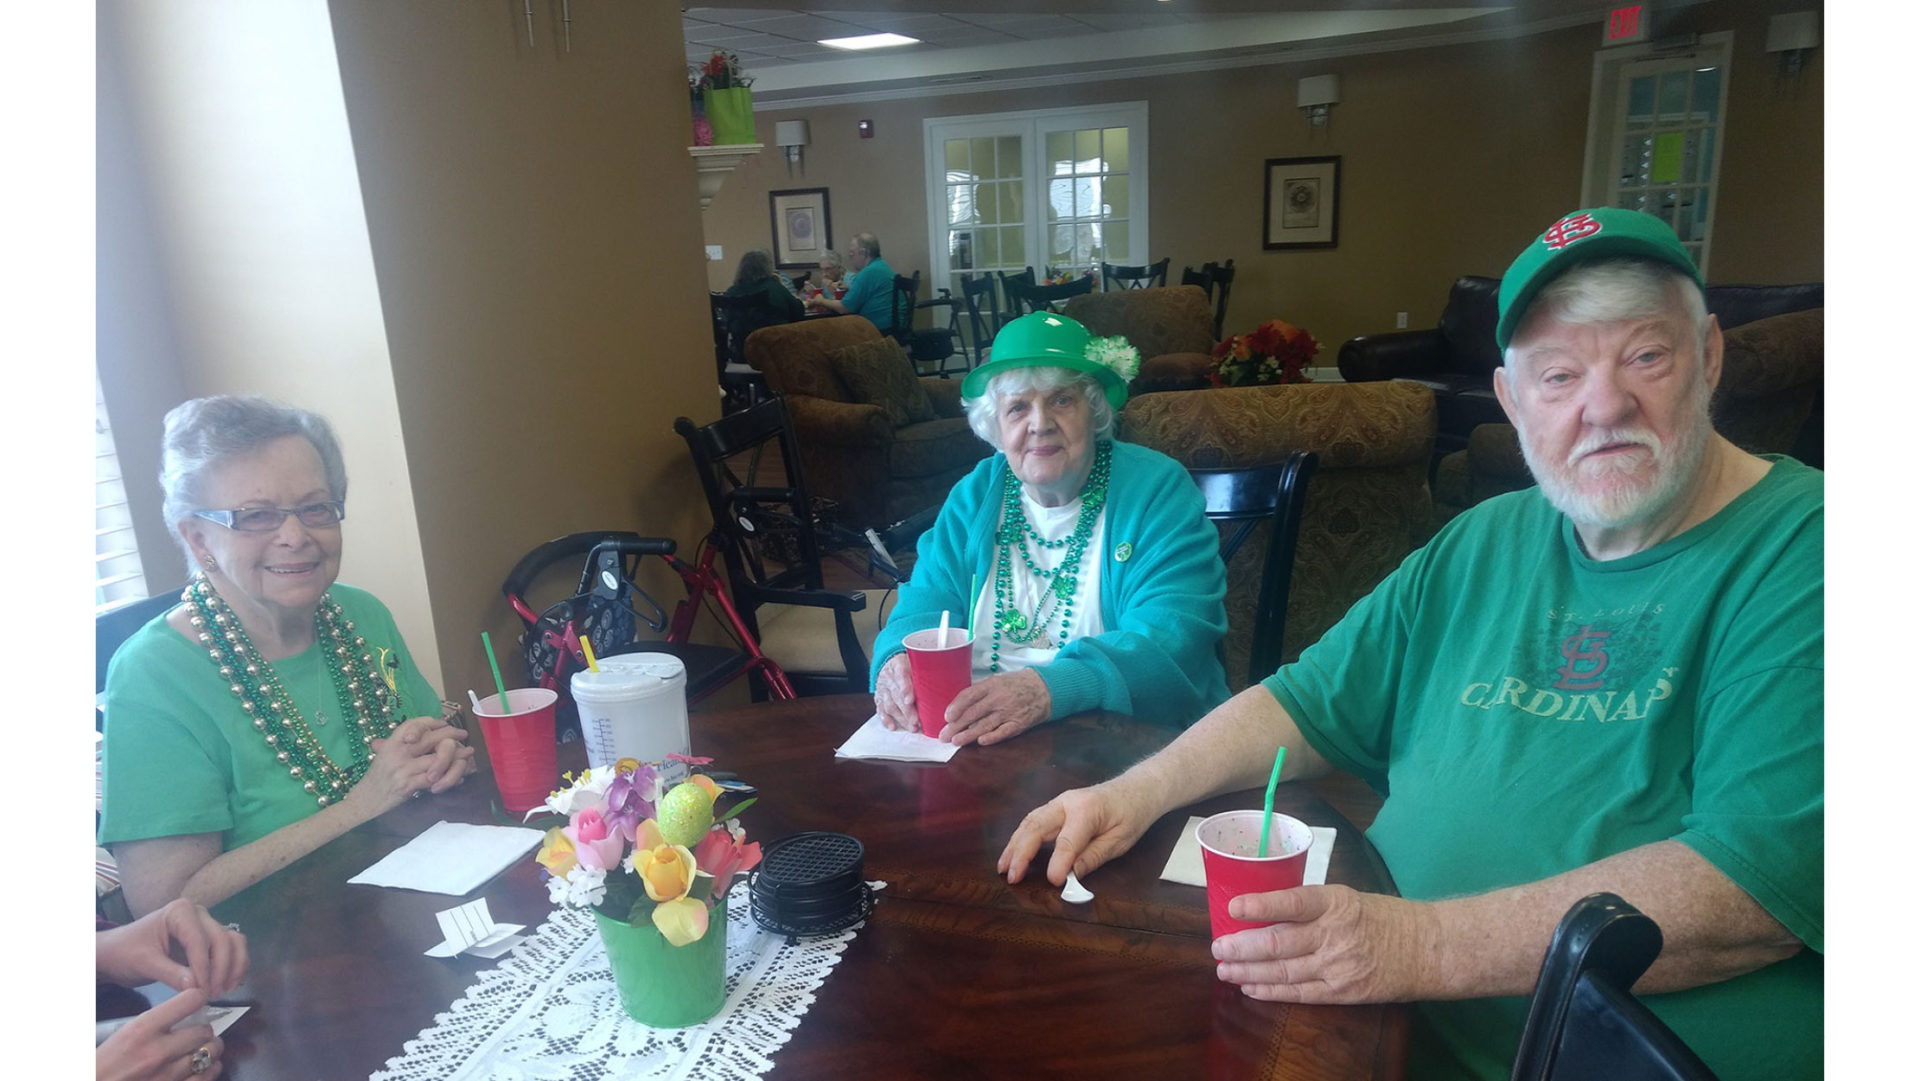 The Wyndham Park residents gather in their St. Patrick’s Day attire for their annual party.